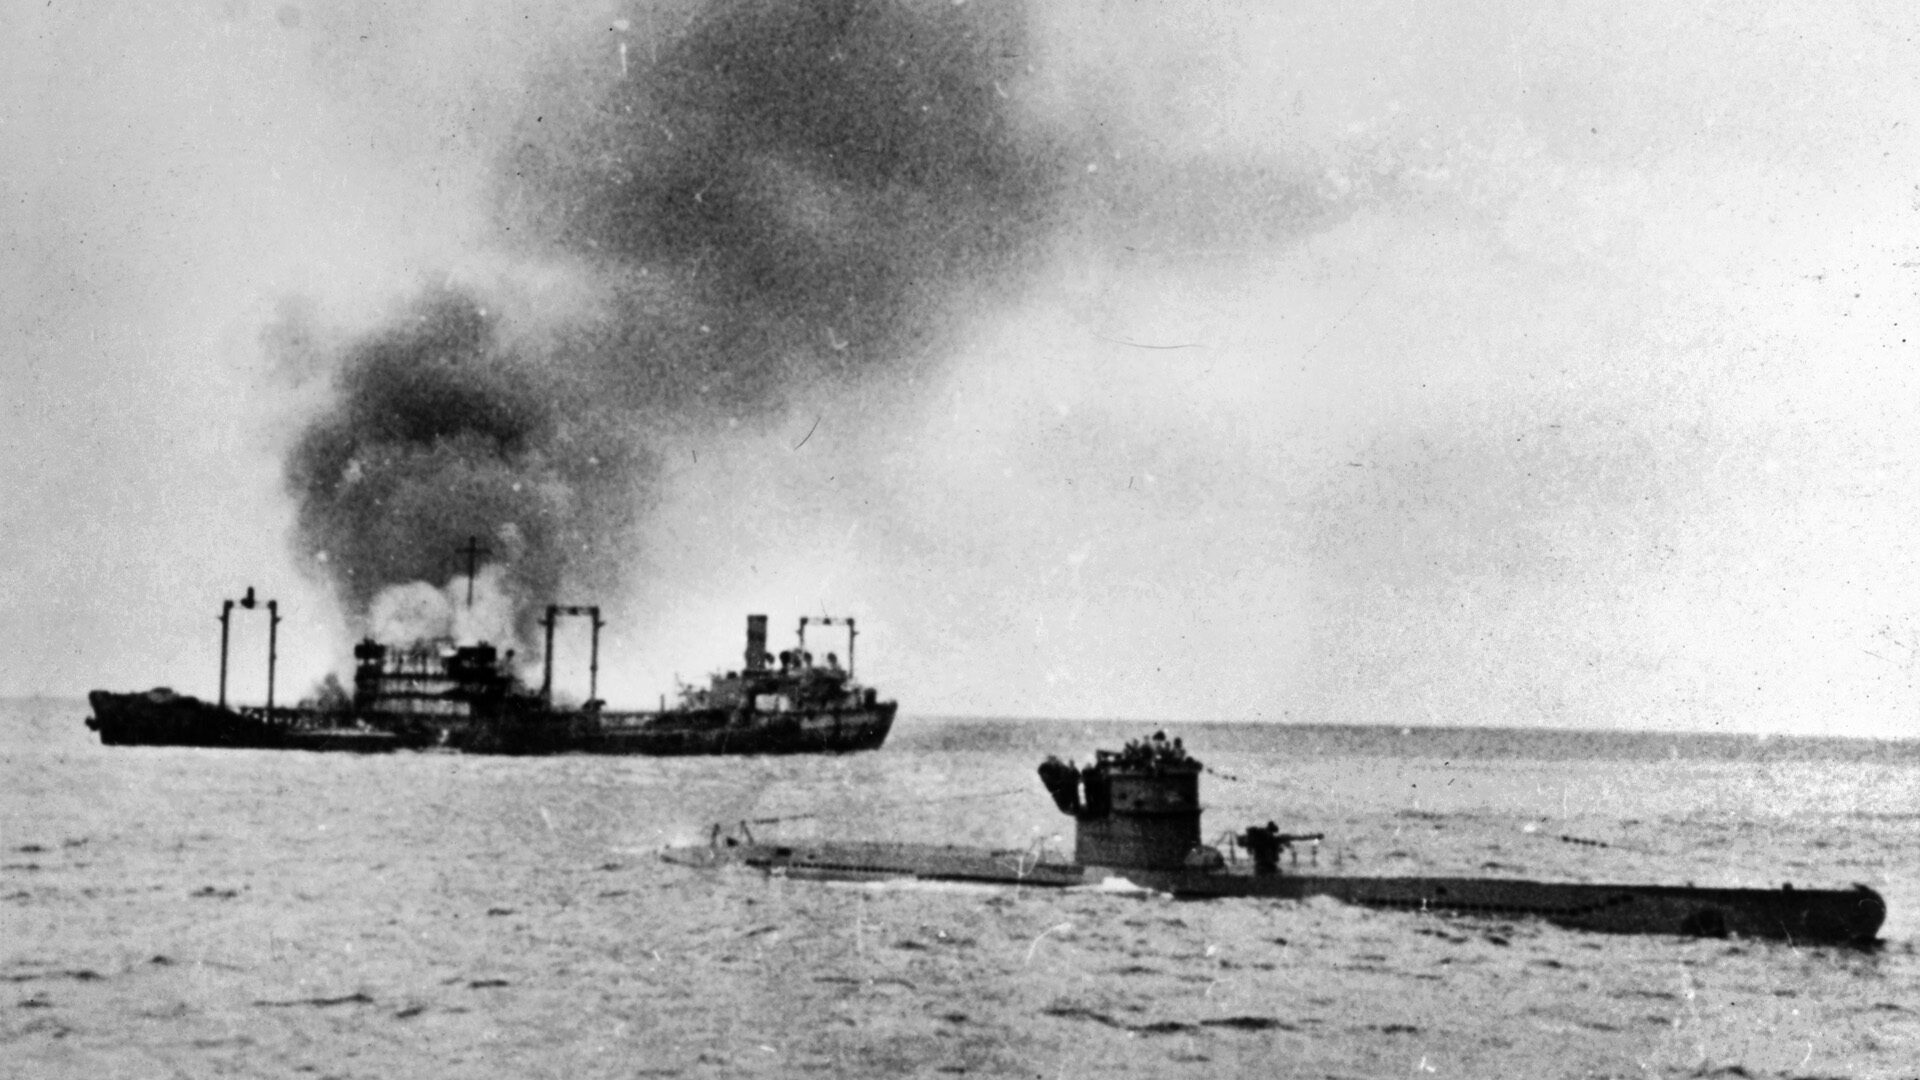 Riding on the surface off the coast of North Africa, the Nazi submarine U-442 and her crew remain near a burning tanker, torpedoed in January 1943, its cargo of precious fuel going to the bottom.